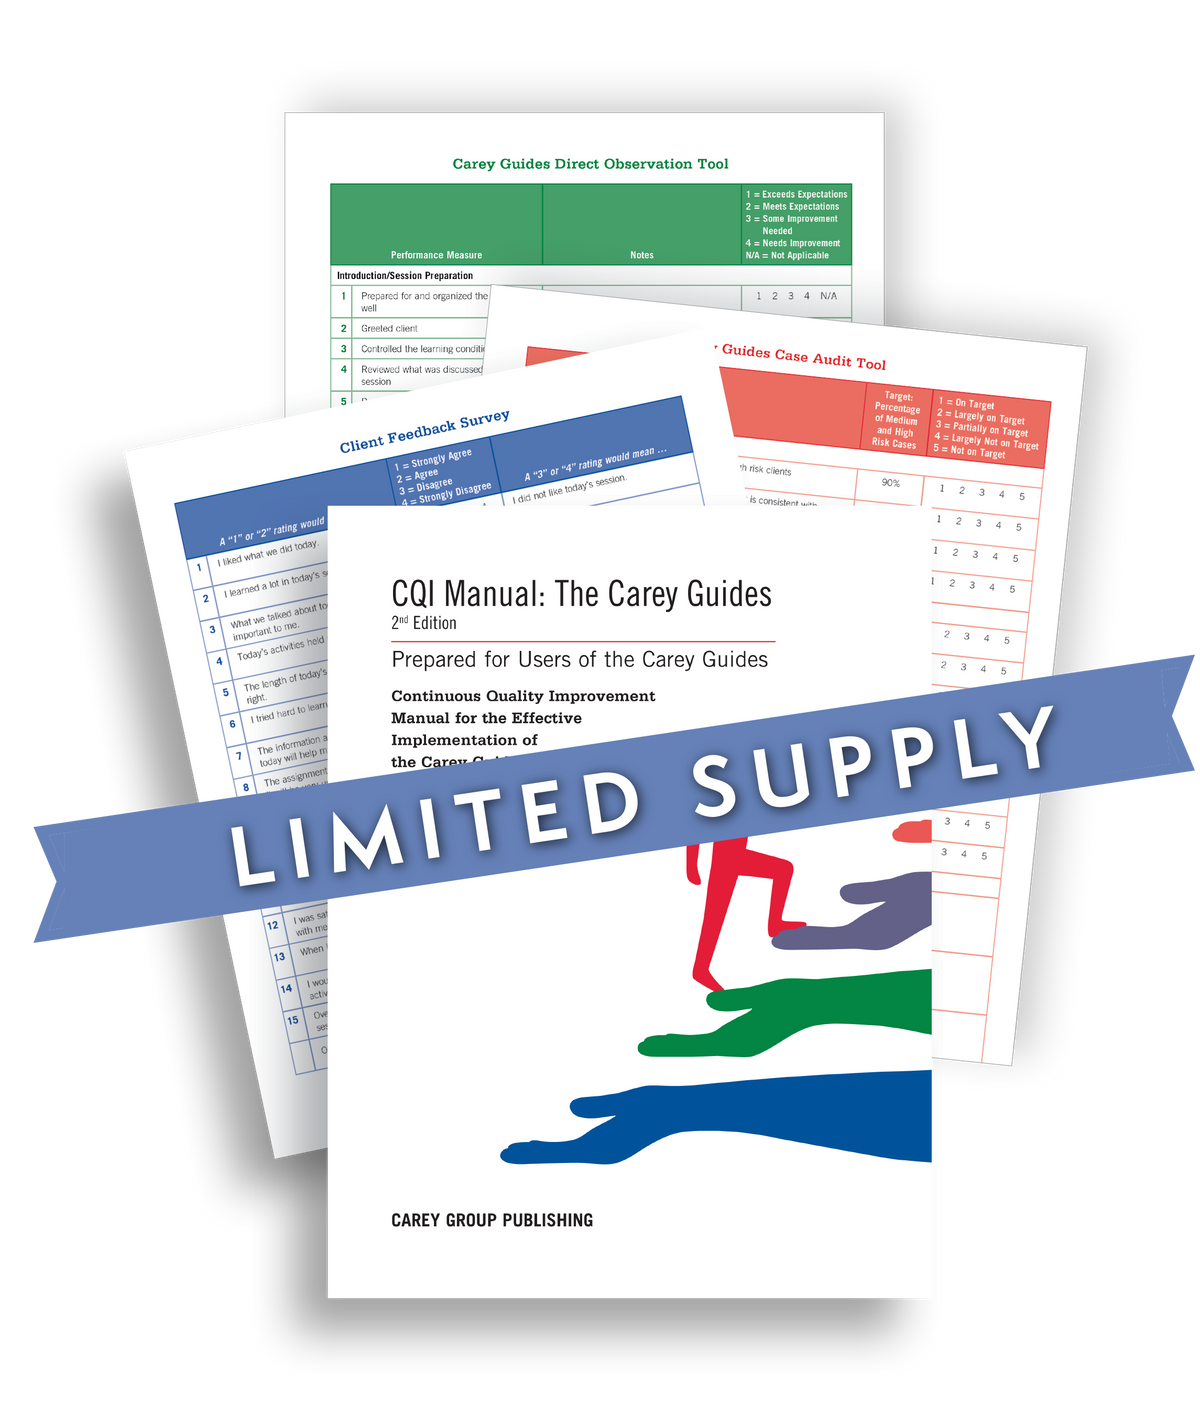 Carey Guides Continuous Quality Improvement (CQI) Kit, Revised